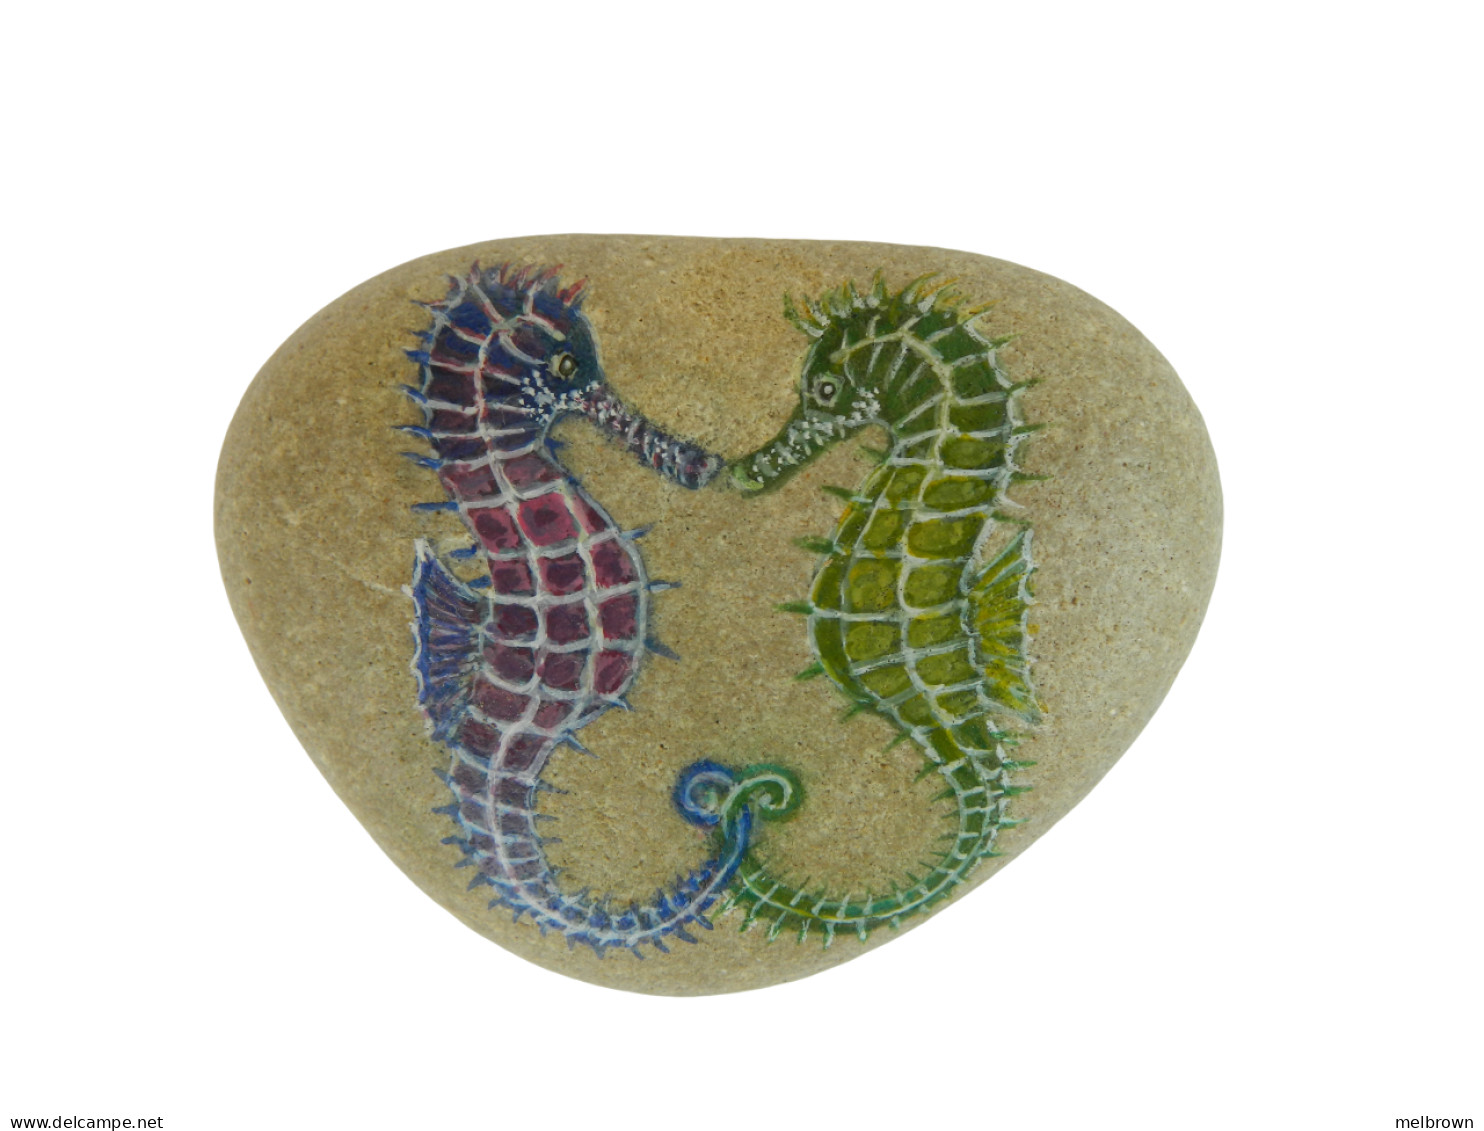 Seahorses Hand Painted On A Heart-Shaped Beach Stone Paperweight - Animals